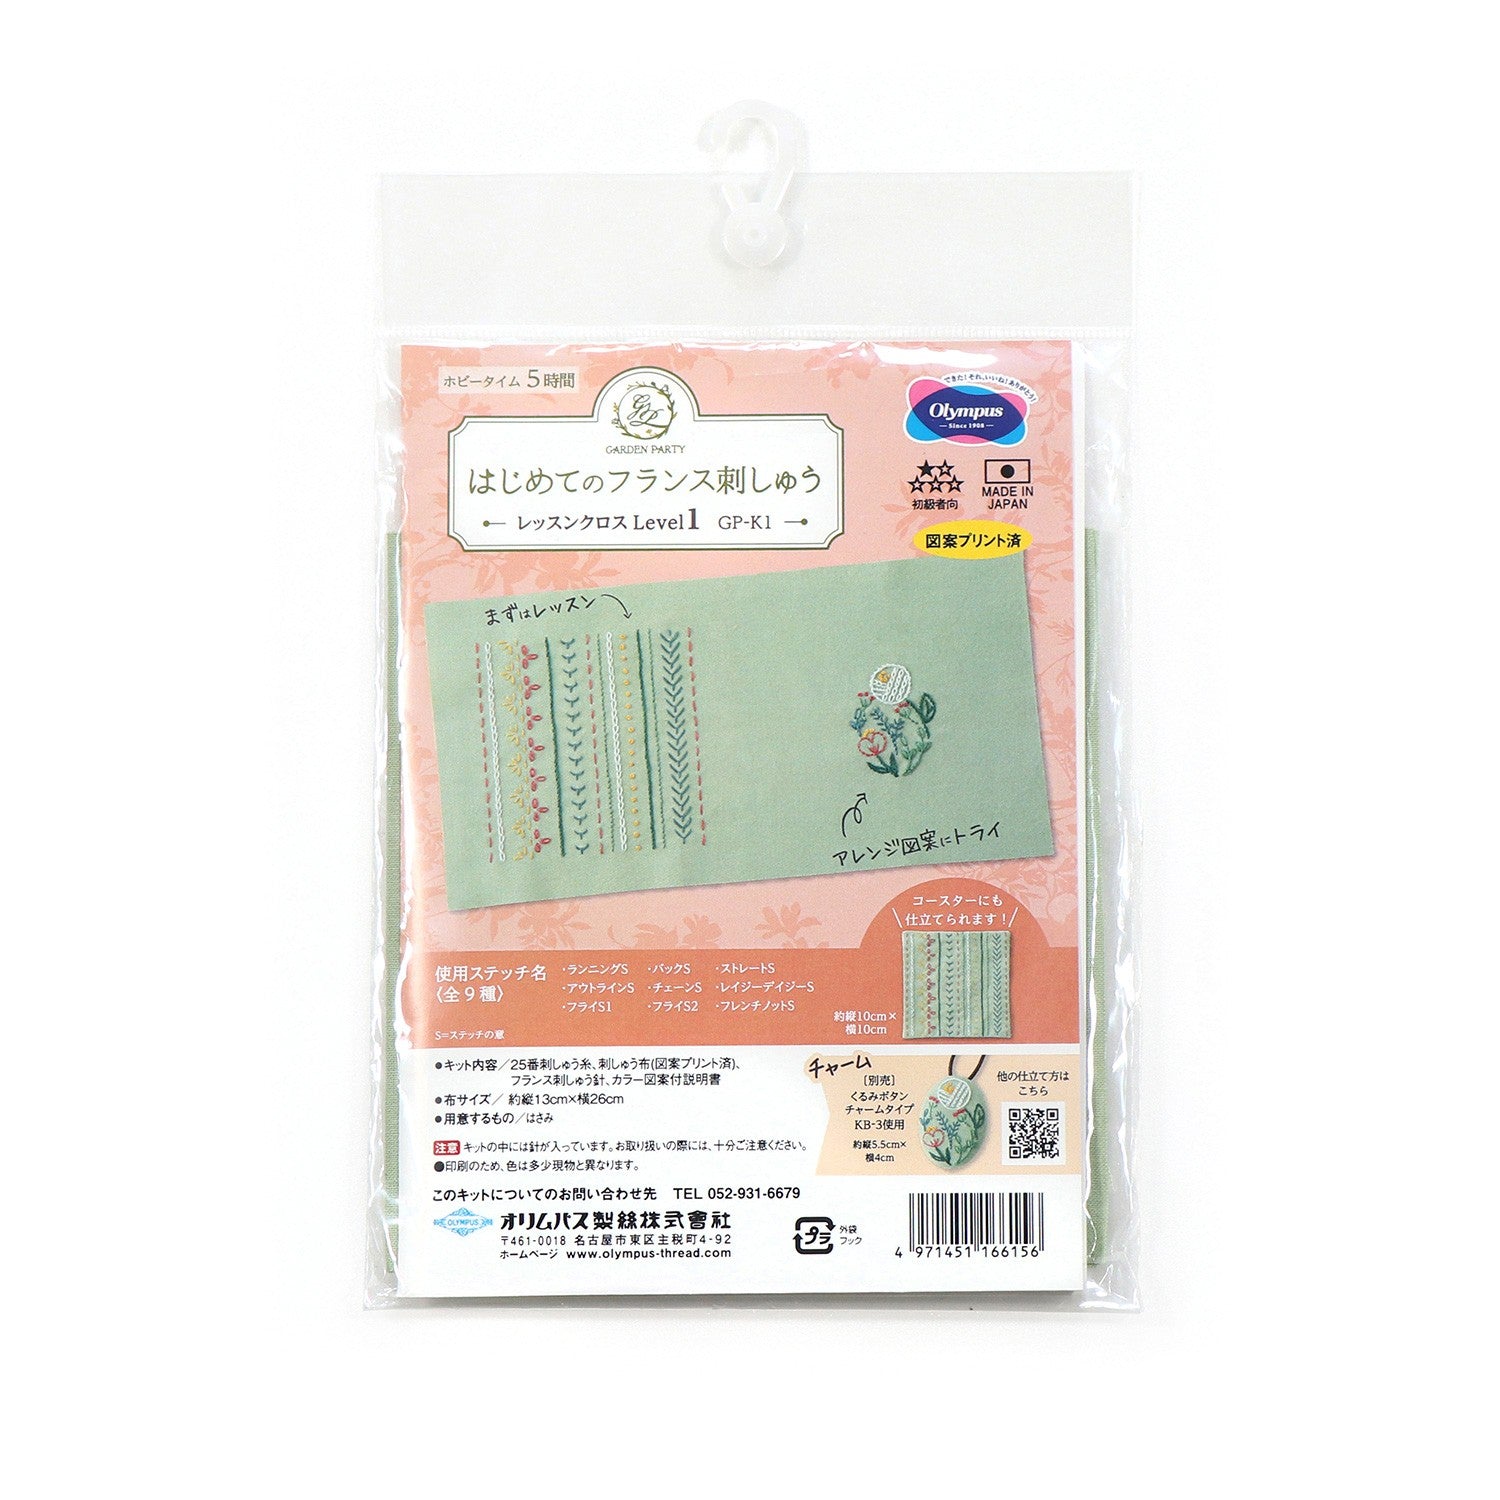 Garden Party Embroidery Lesson Kit - Level 1 - homesewn